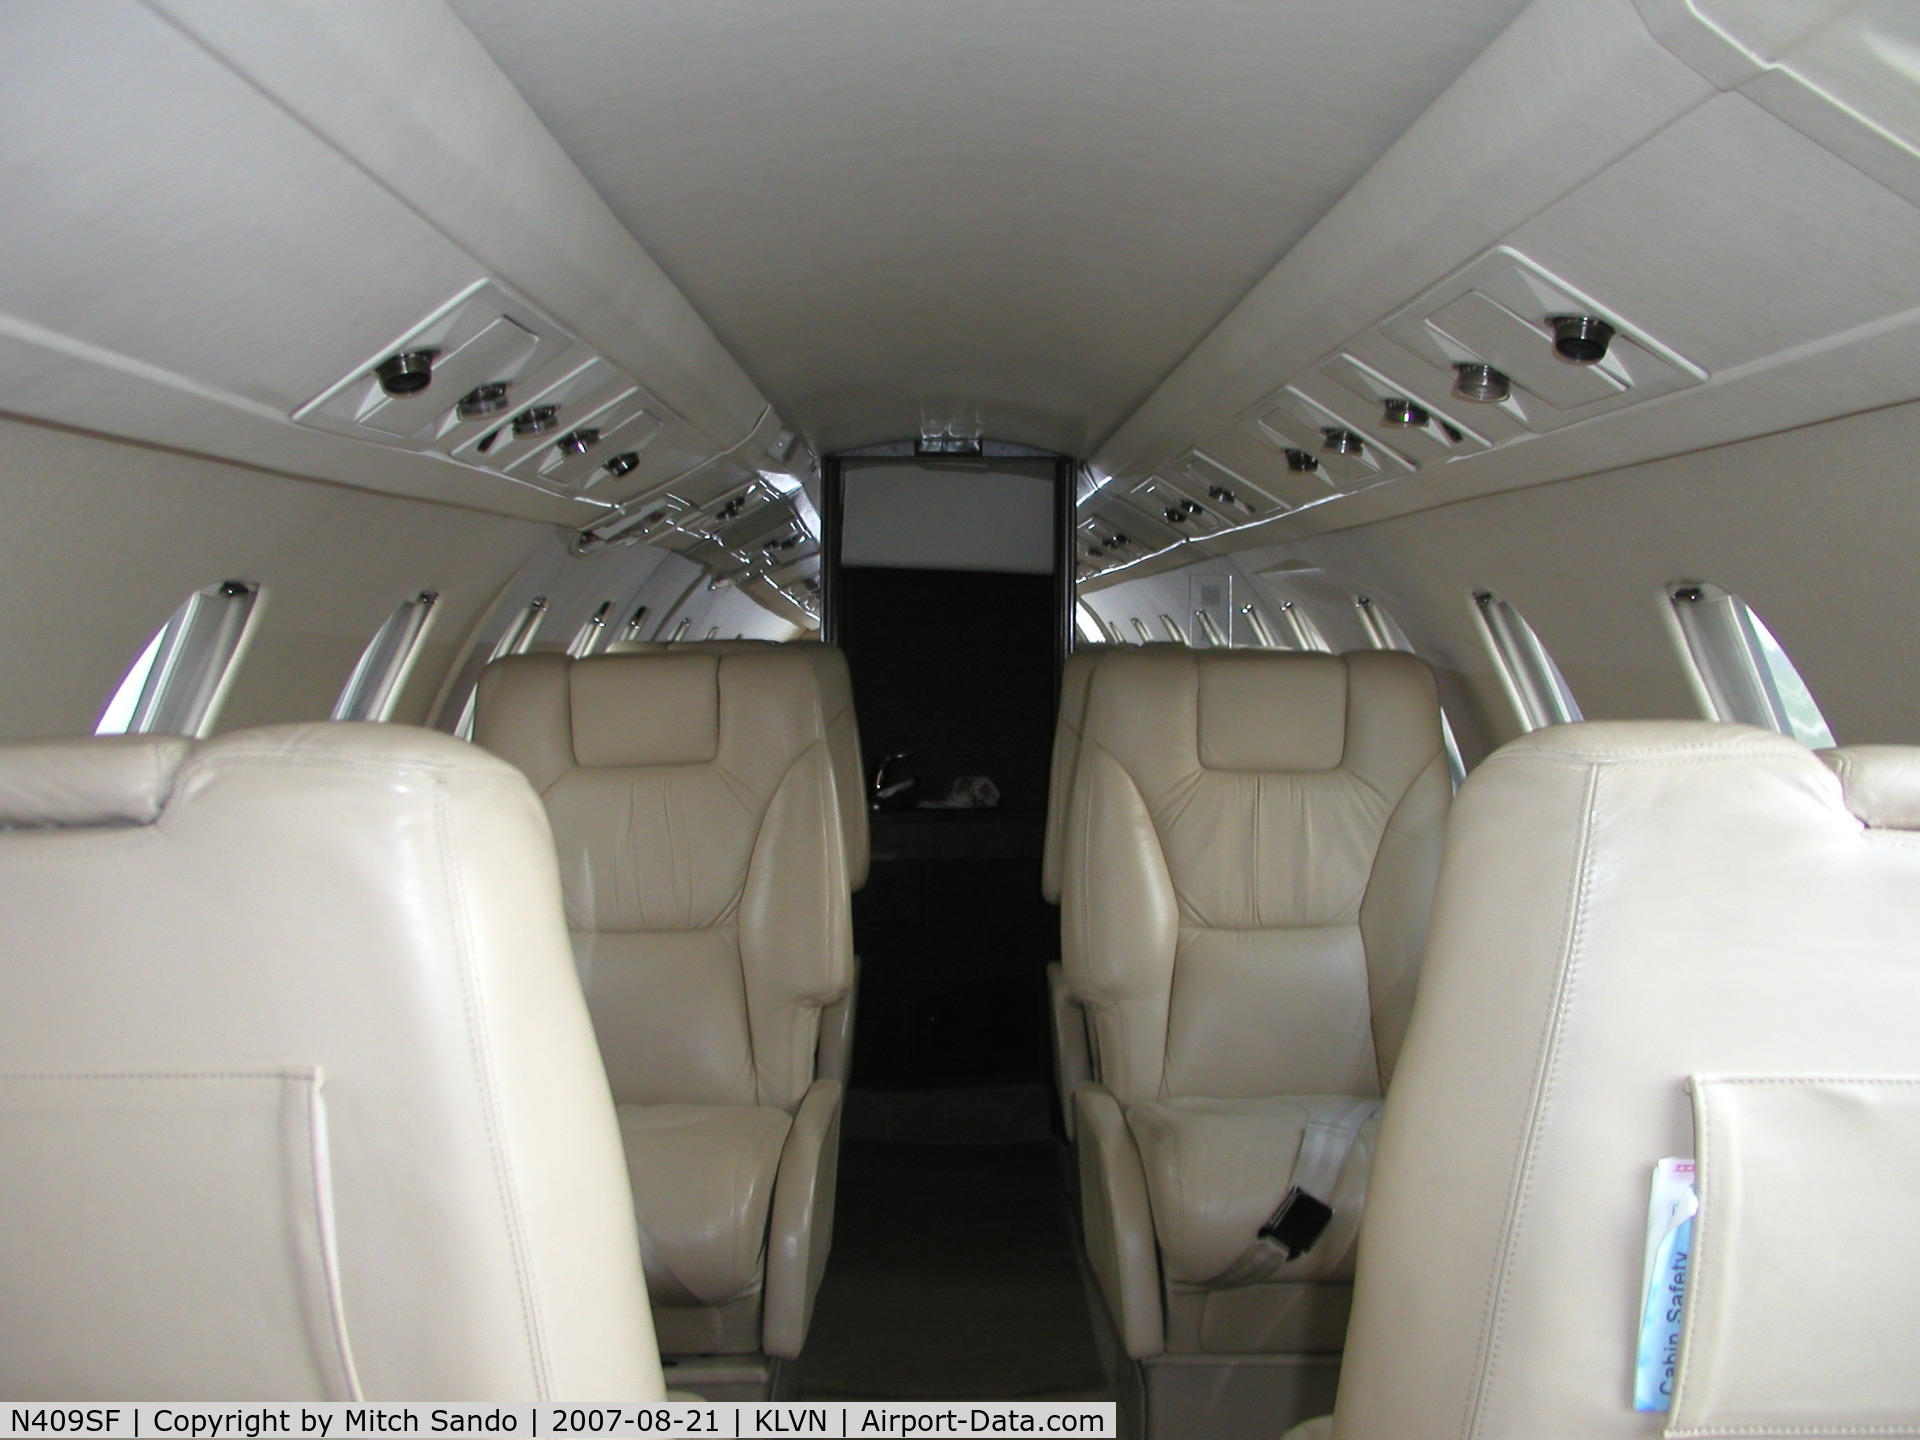 N409SF, 1984 Cessna 650 Citation C/N 650-0029, Thanks to the guys at the Aircraft Resource Center for this picture.